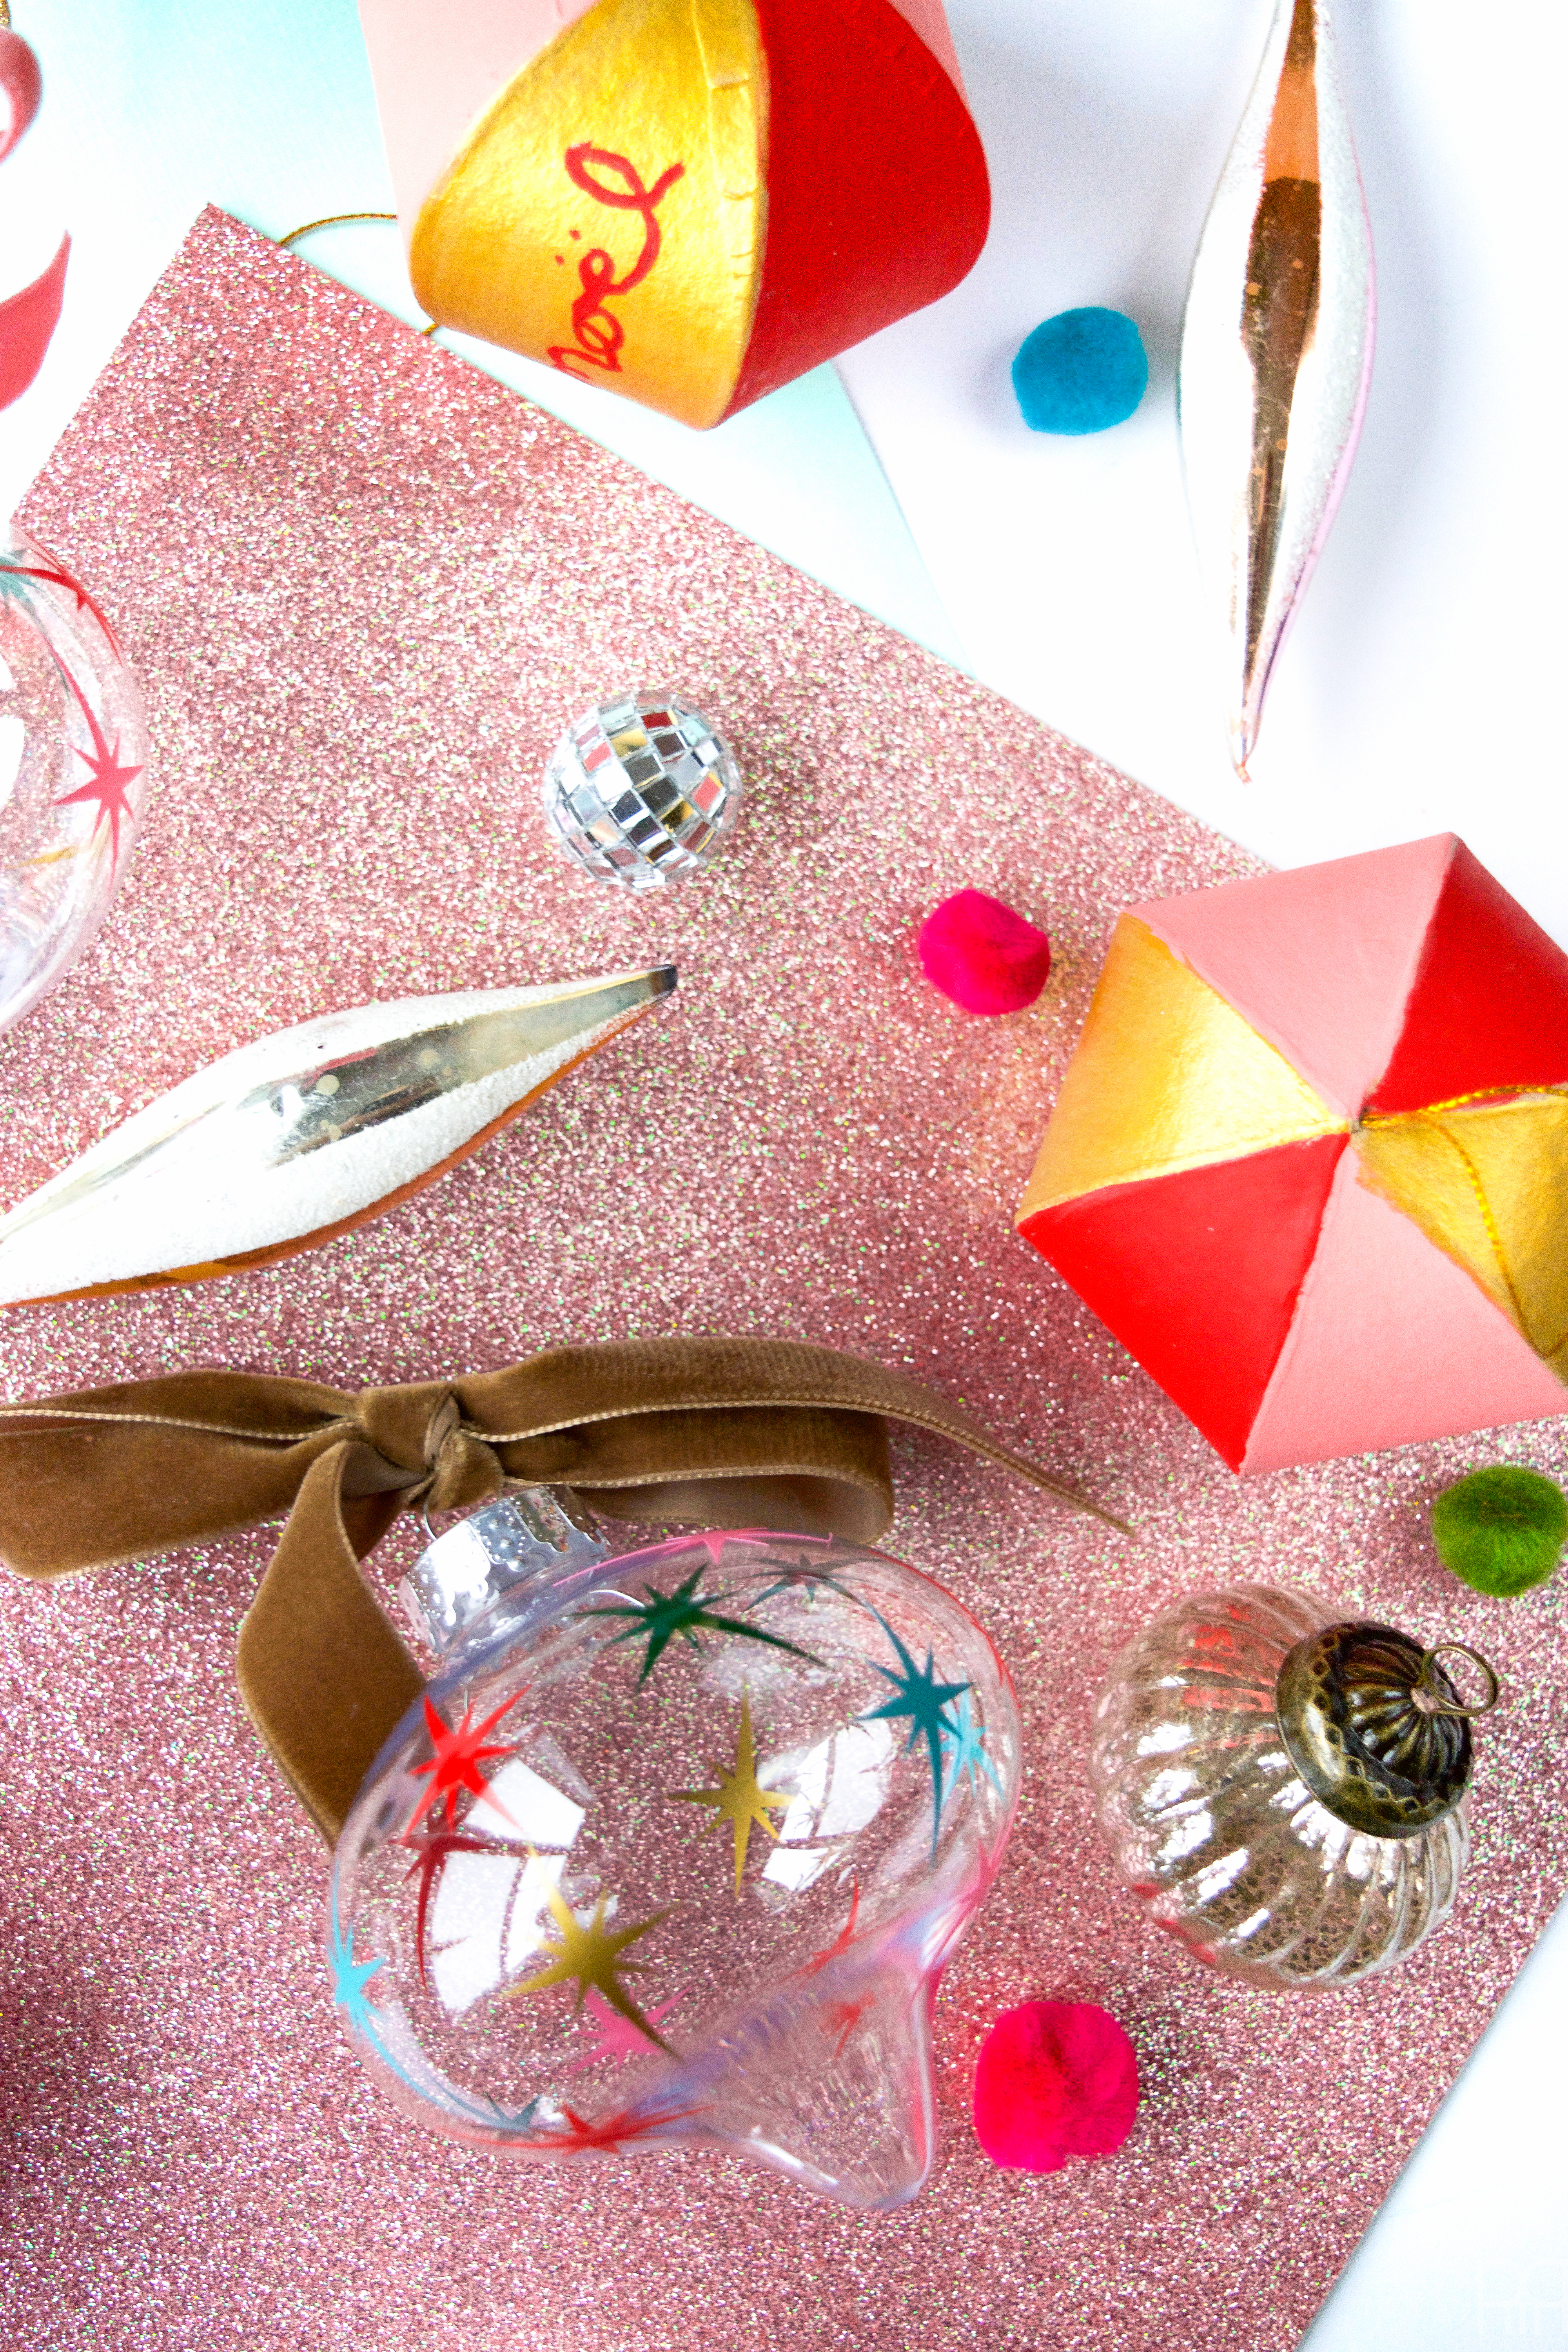 Create a vintage MCM style ornament using your Cricut and some vinyl #starburst #vintage #mcmornament